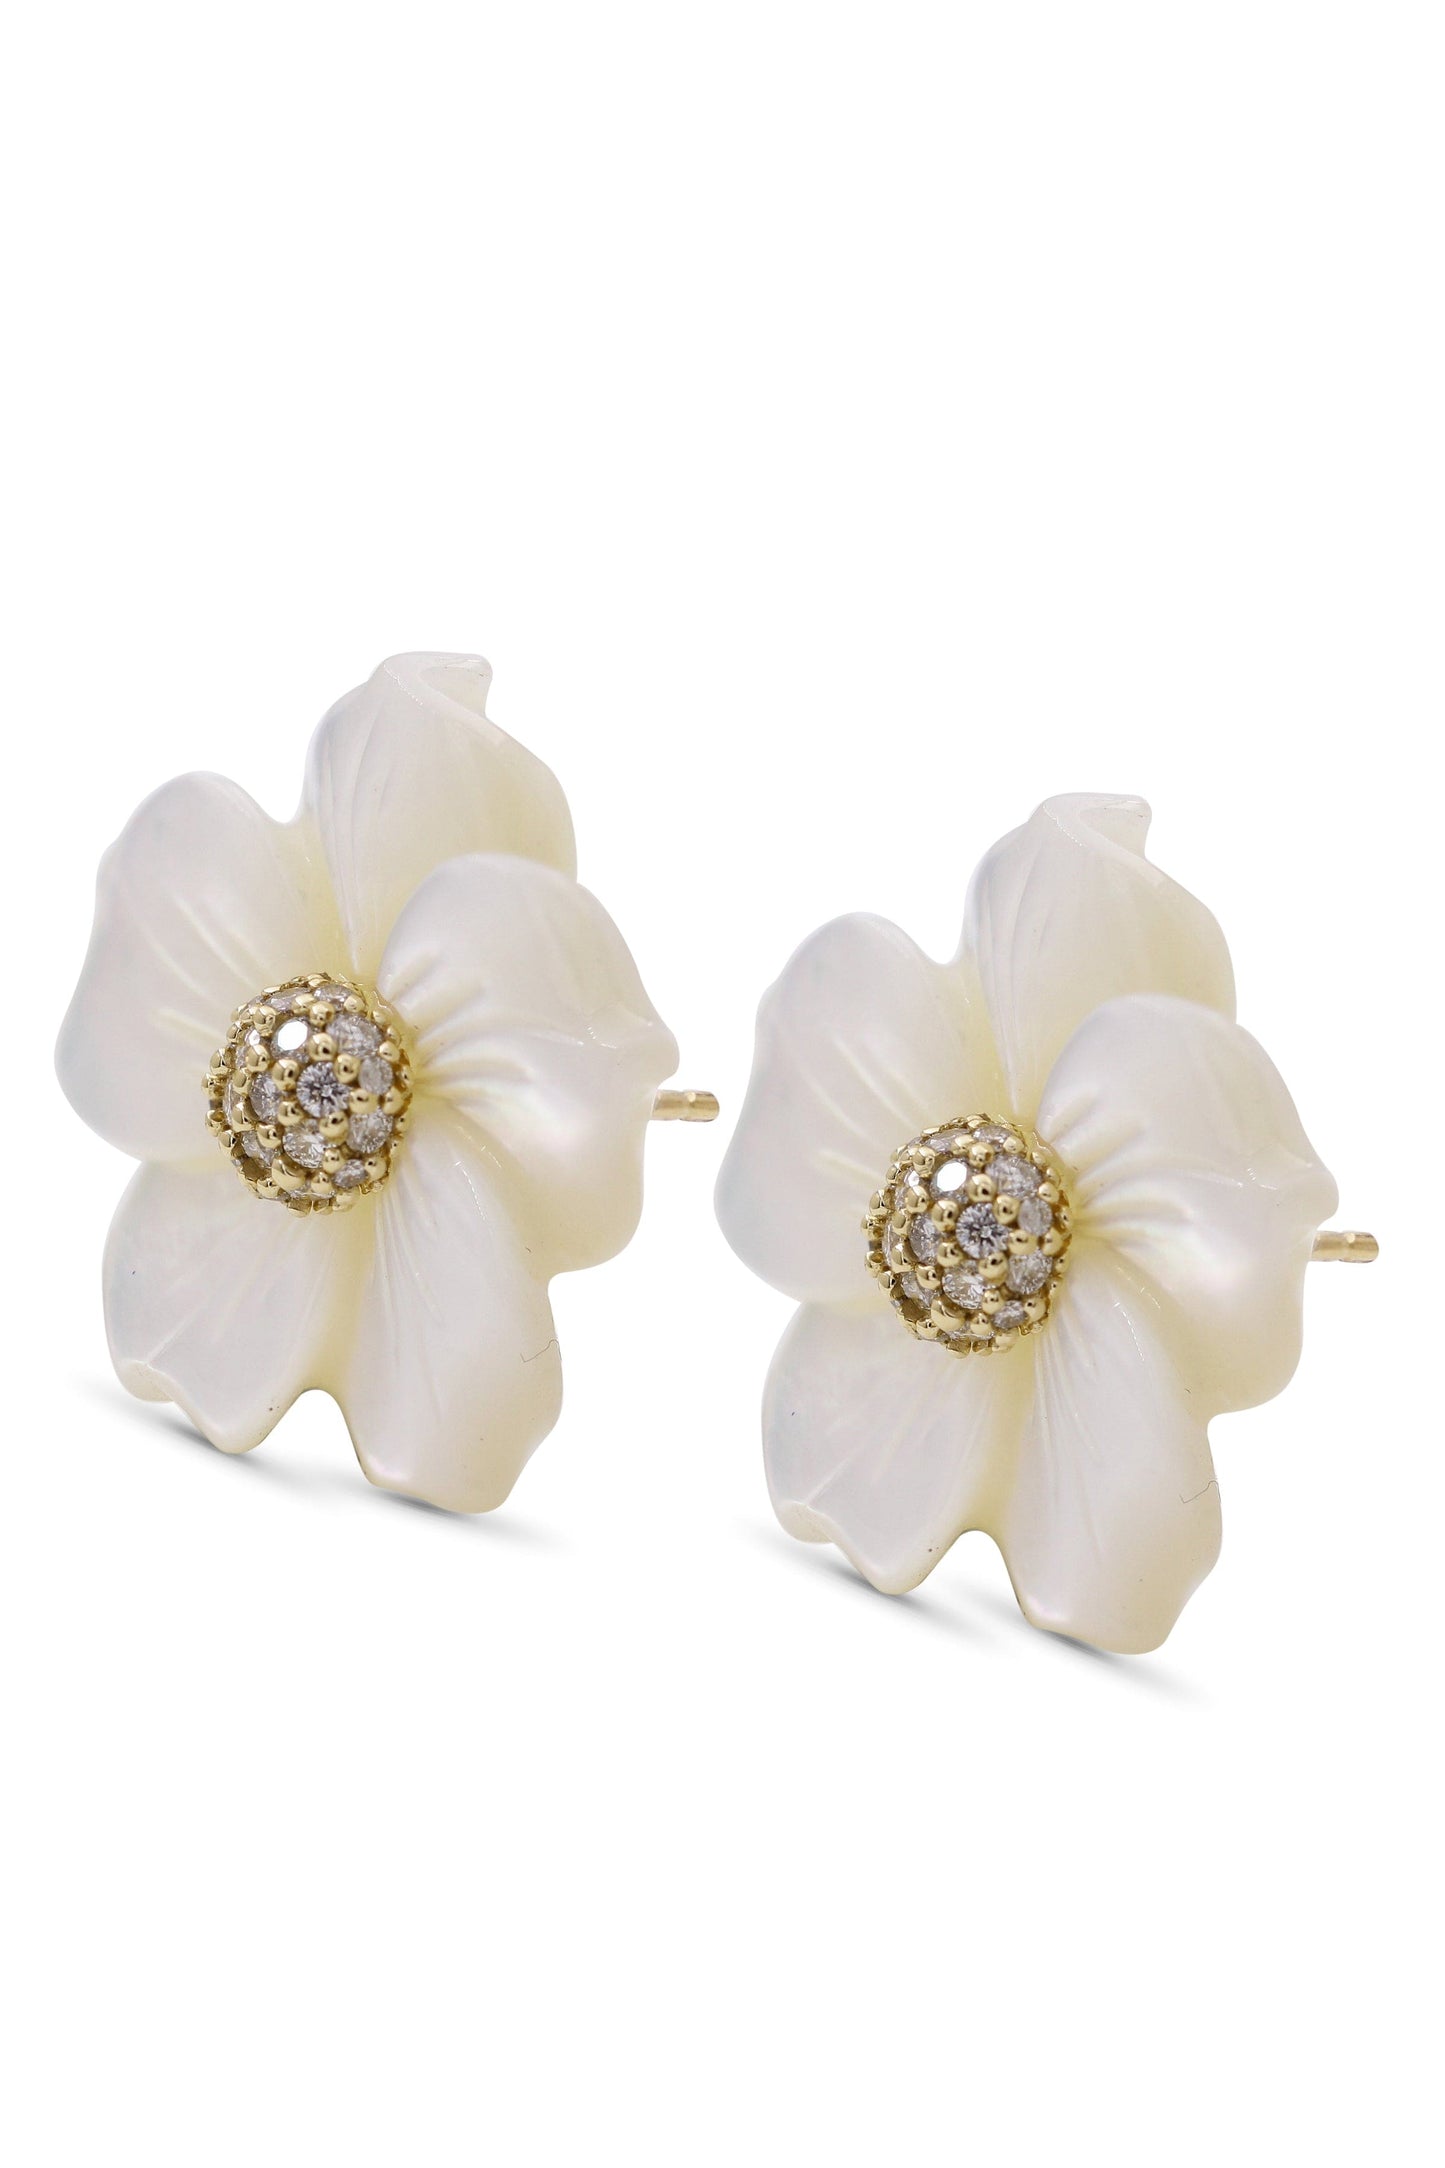 STEPHEN DWECK-Mother of Pearl Flower Earrings-YELLOW GOLD